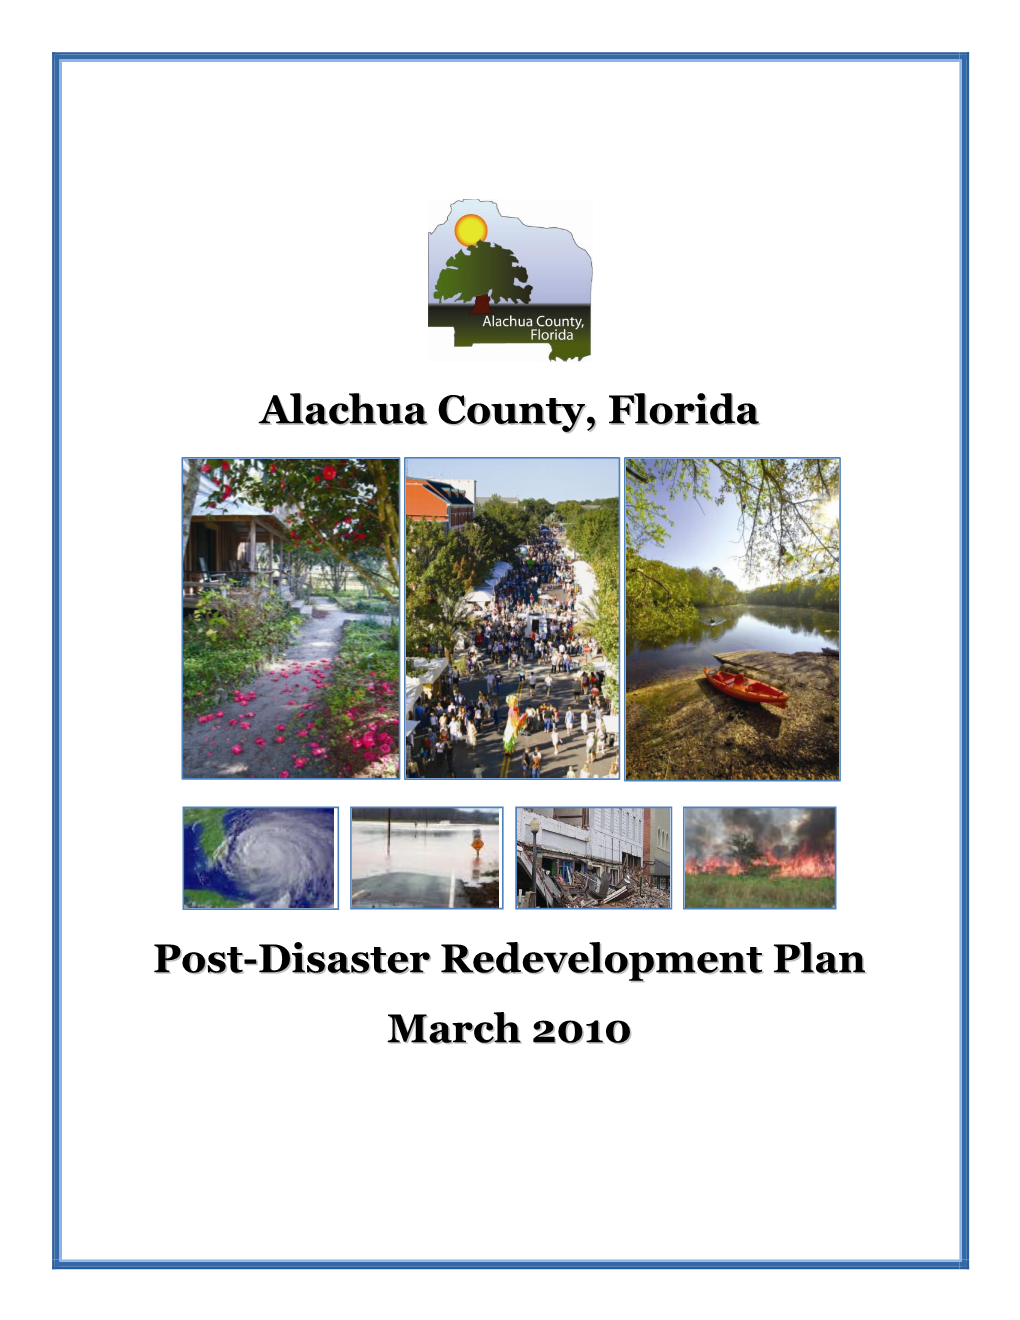 Alachua County, Florida Post-Disaster Redevelopment Plan March 2010